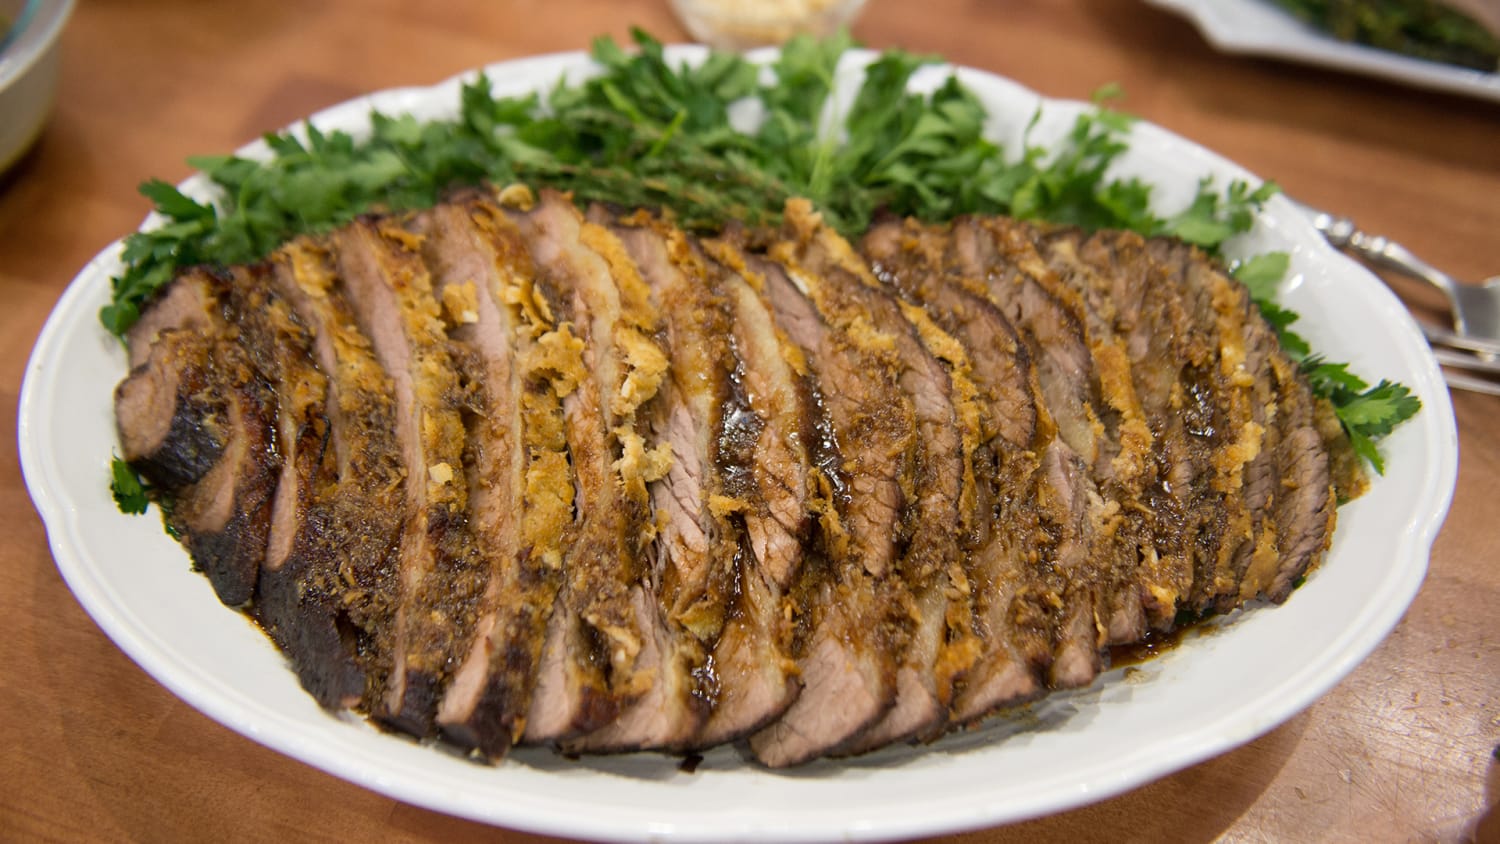 Gail Simmons serves brisket with hot horseradish dressing for Passover